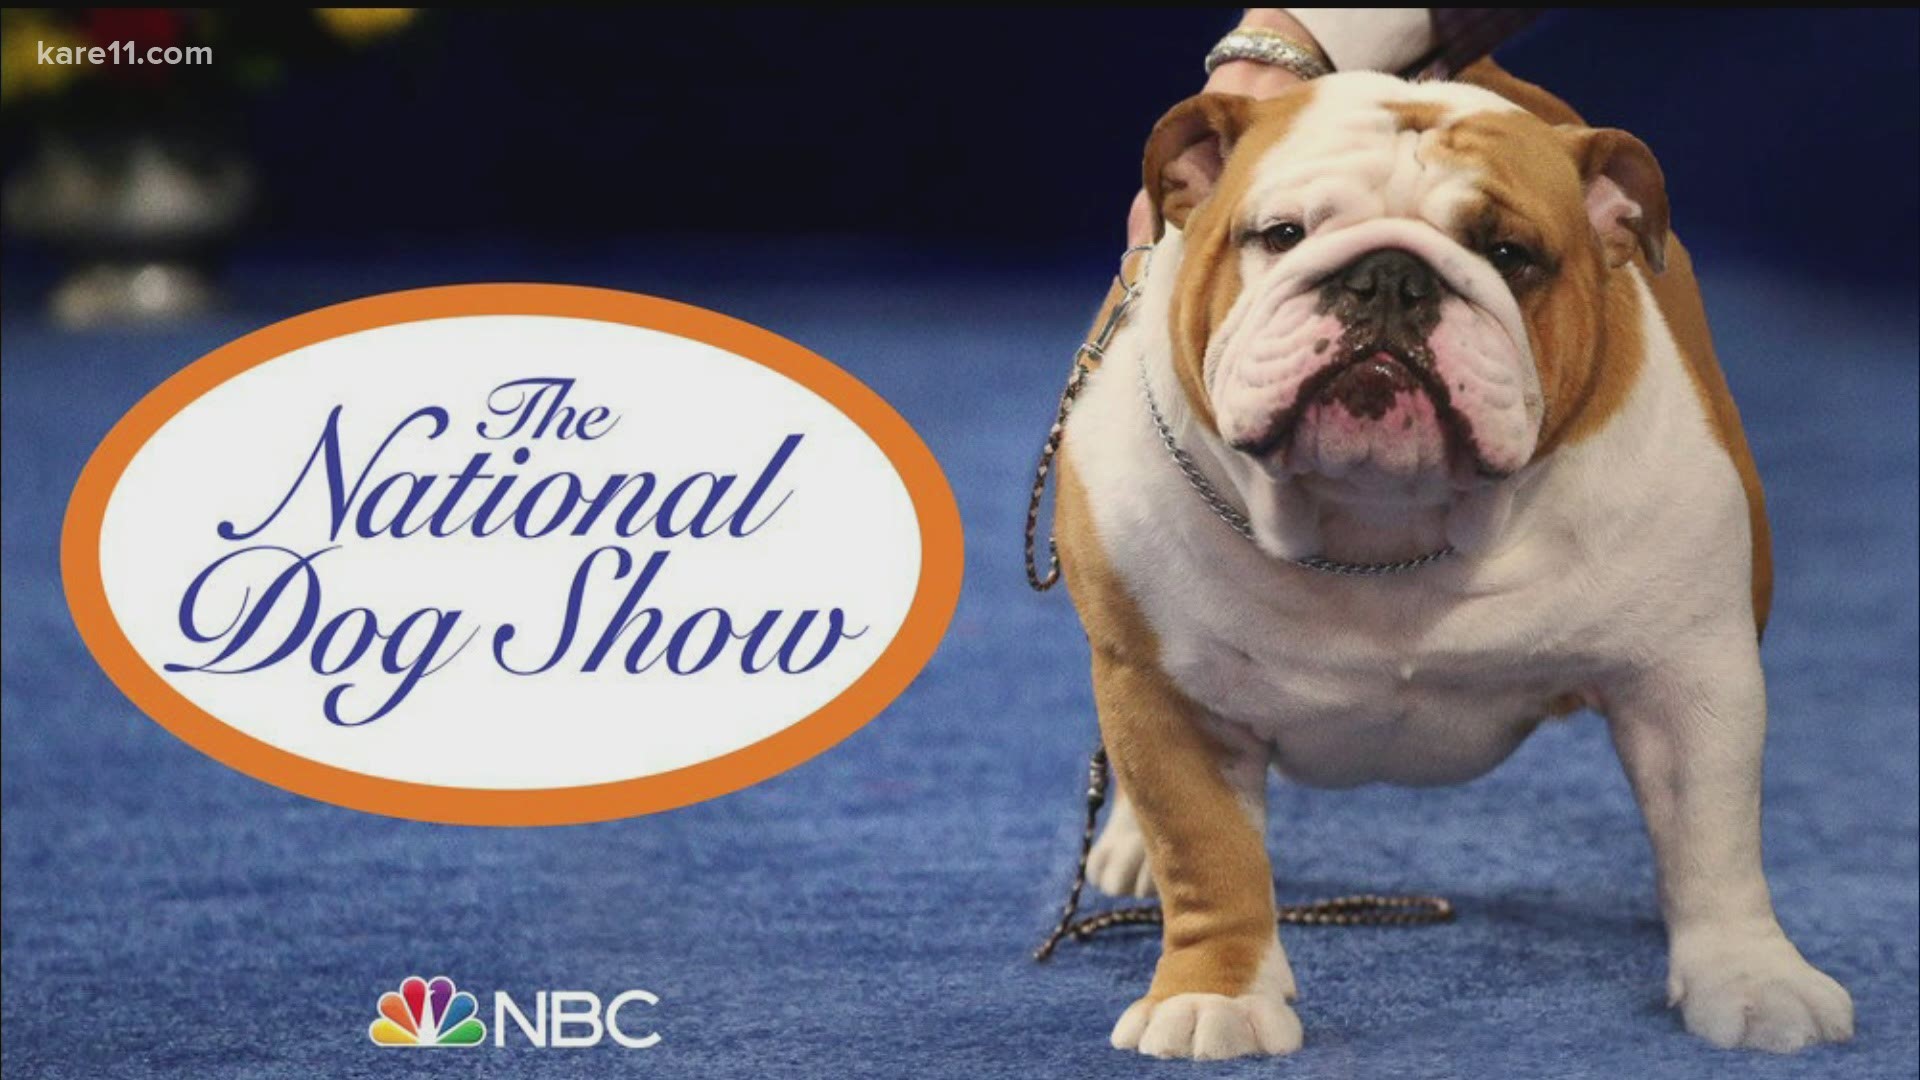 National Dog Show returns to NBC this Thanksgiving